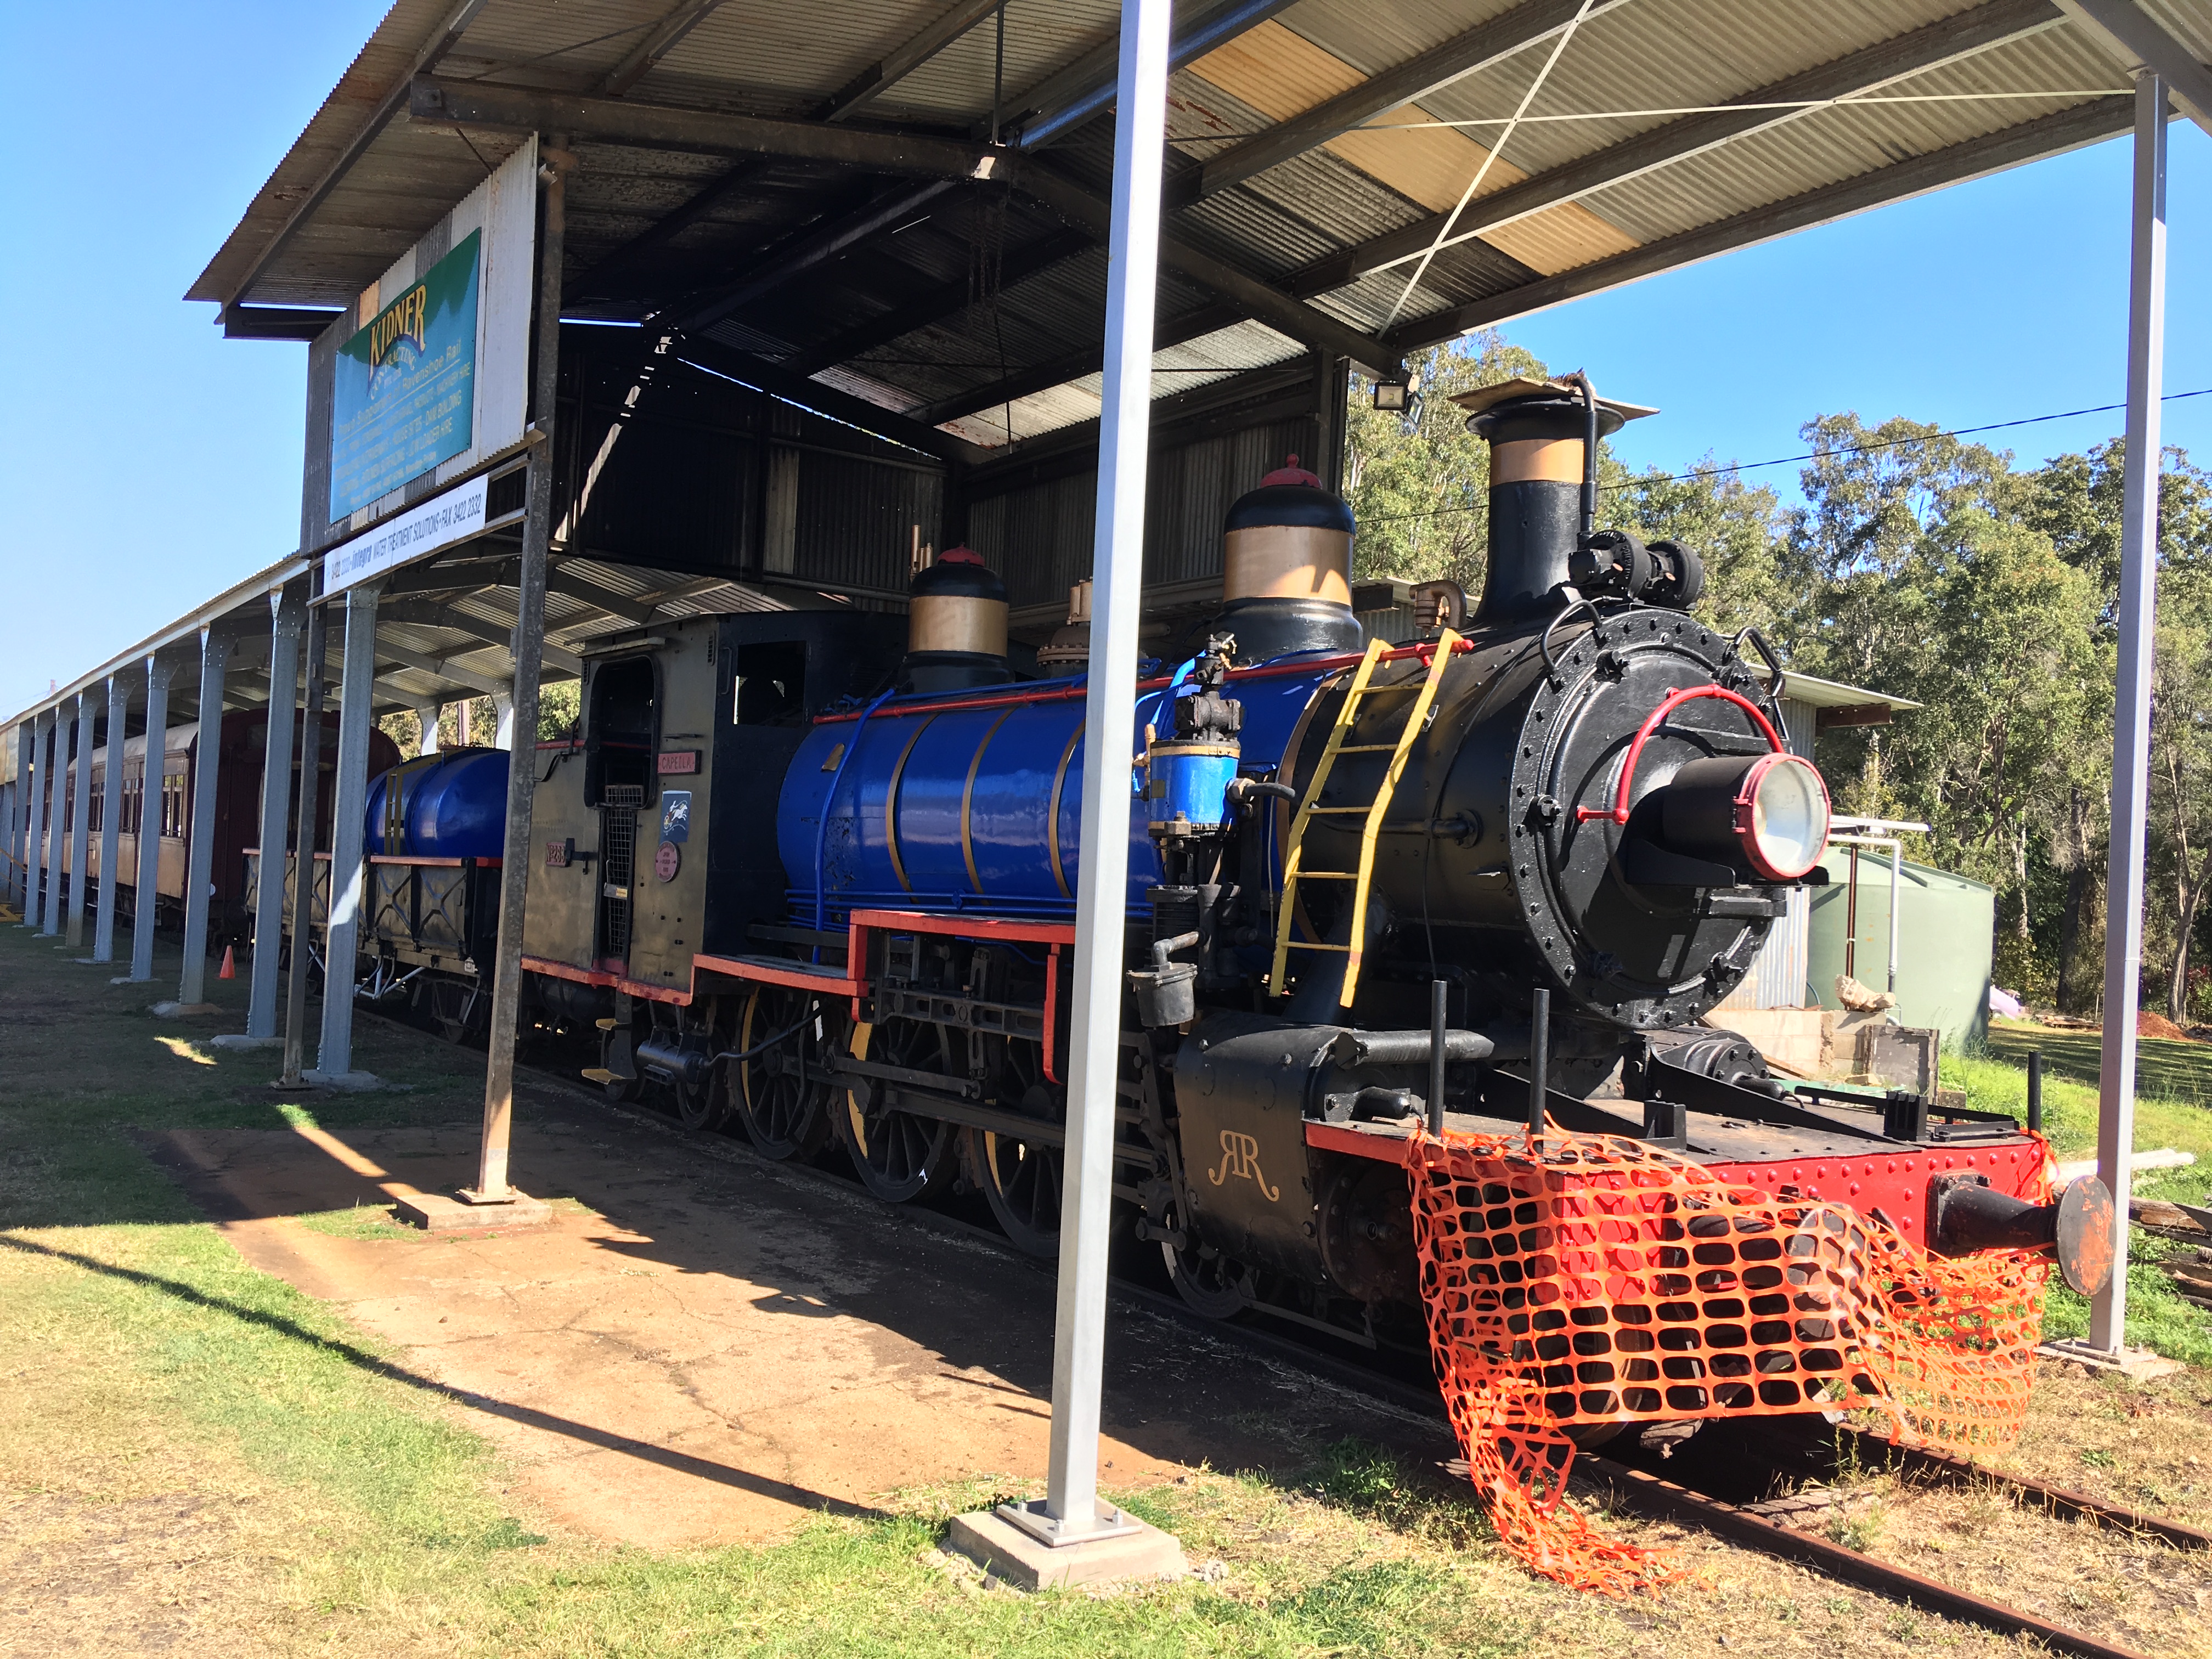 Ravenshoe Railway Caravan Park - we stayed at the Ravenshoe Railway Caravan Park for nine days and the did the waterfall circuit (driving) while we were there.